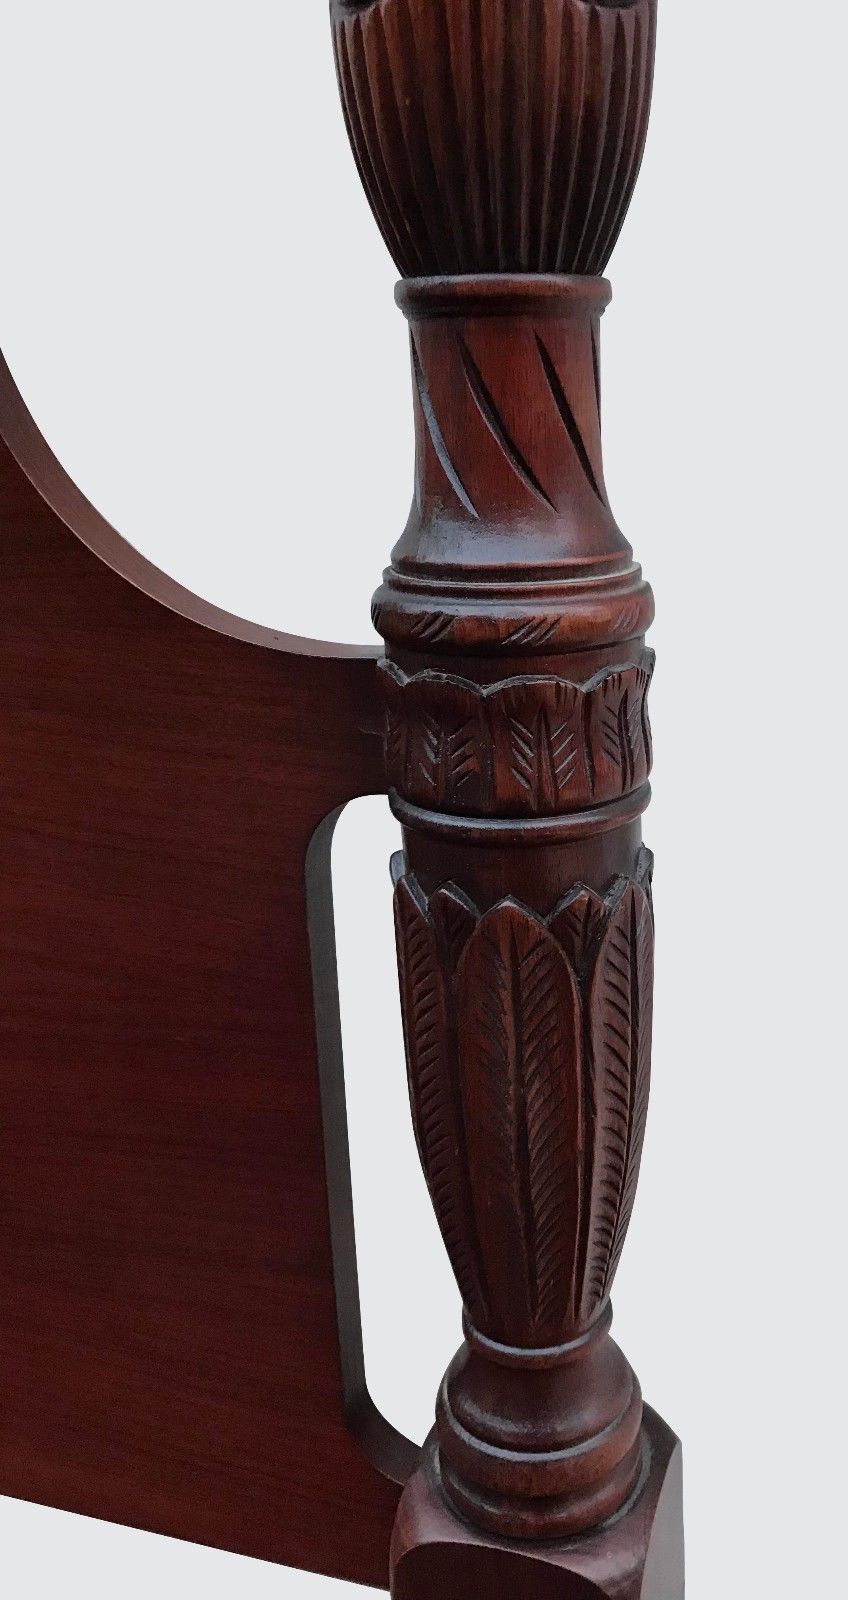 FEDERAL STYLED QUEEN SIZED RICE CARVED CHERRY FOUR POSTER CARVED BED